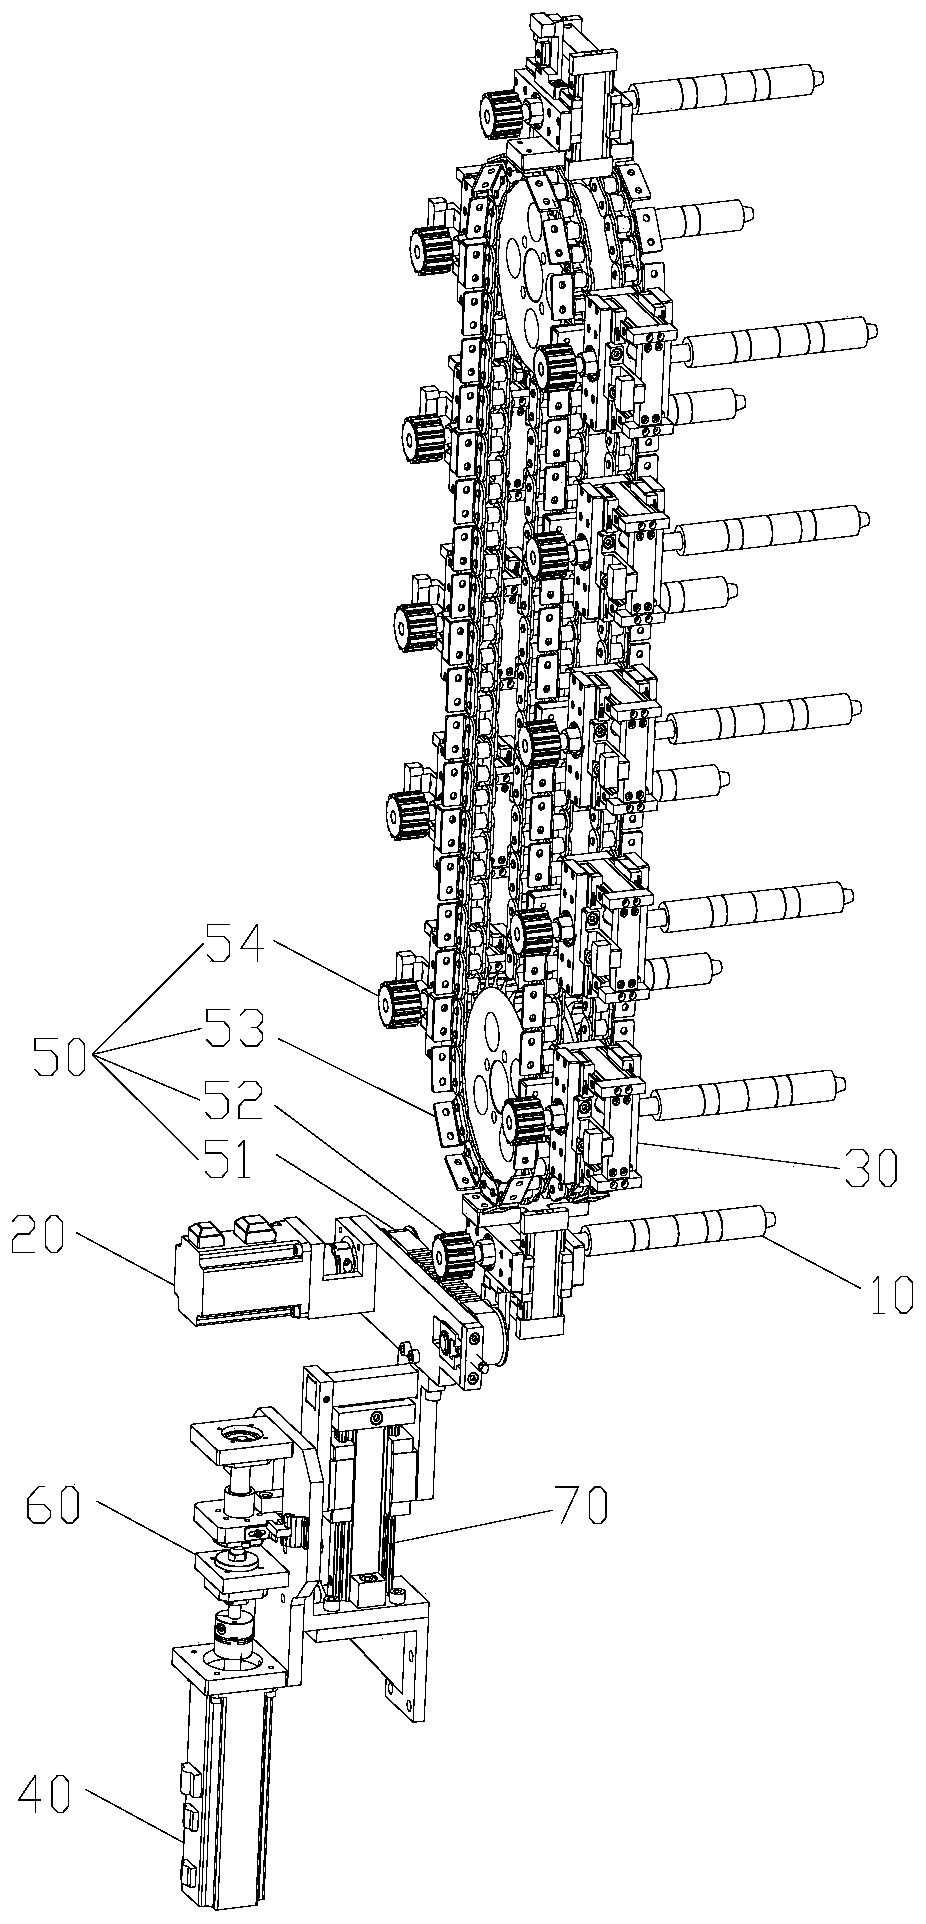 Control method and control device of egg roll making machine, storage medium and processor